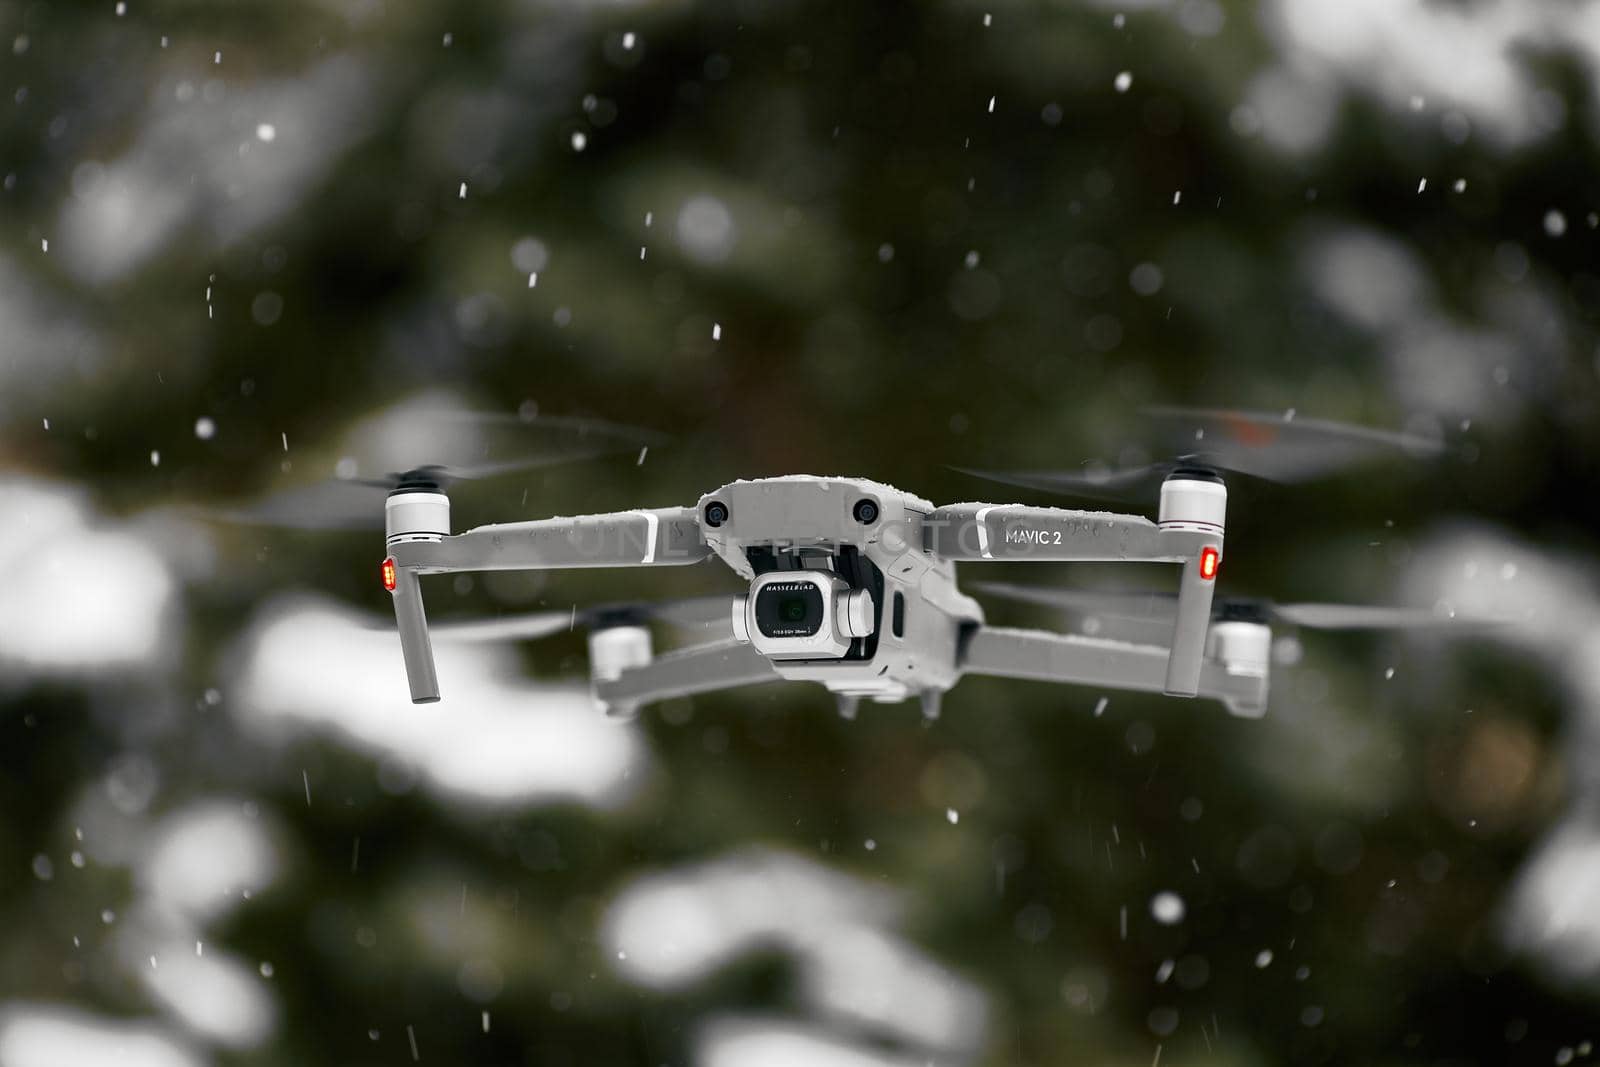 DJI Mavic 2 Pro, flying in wet snow conditions. DJI Mavic 2 Pro one of the most portable drones in the market, with Hasselblad camera. 07.12.2018 Rostov-on-Don, Russia